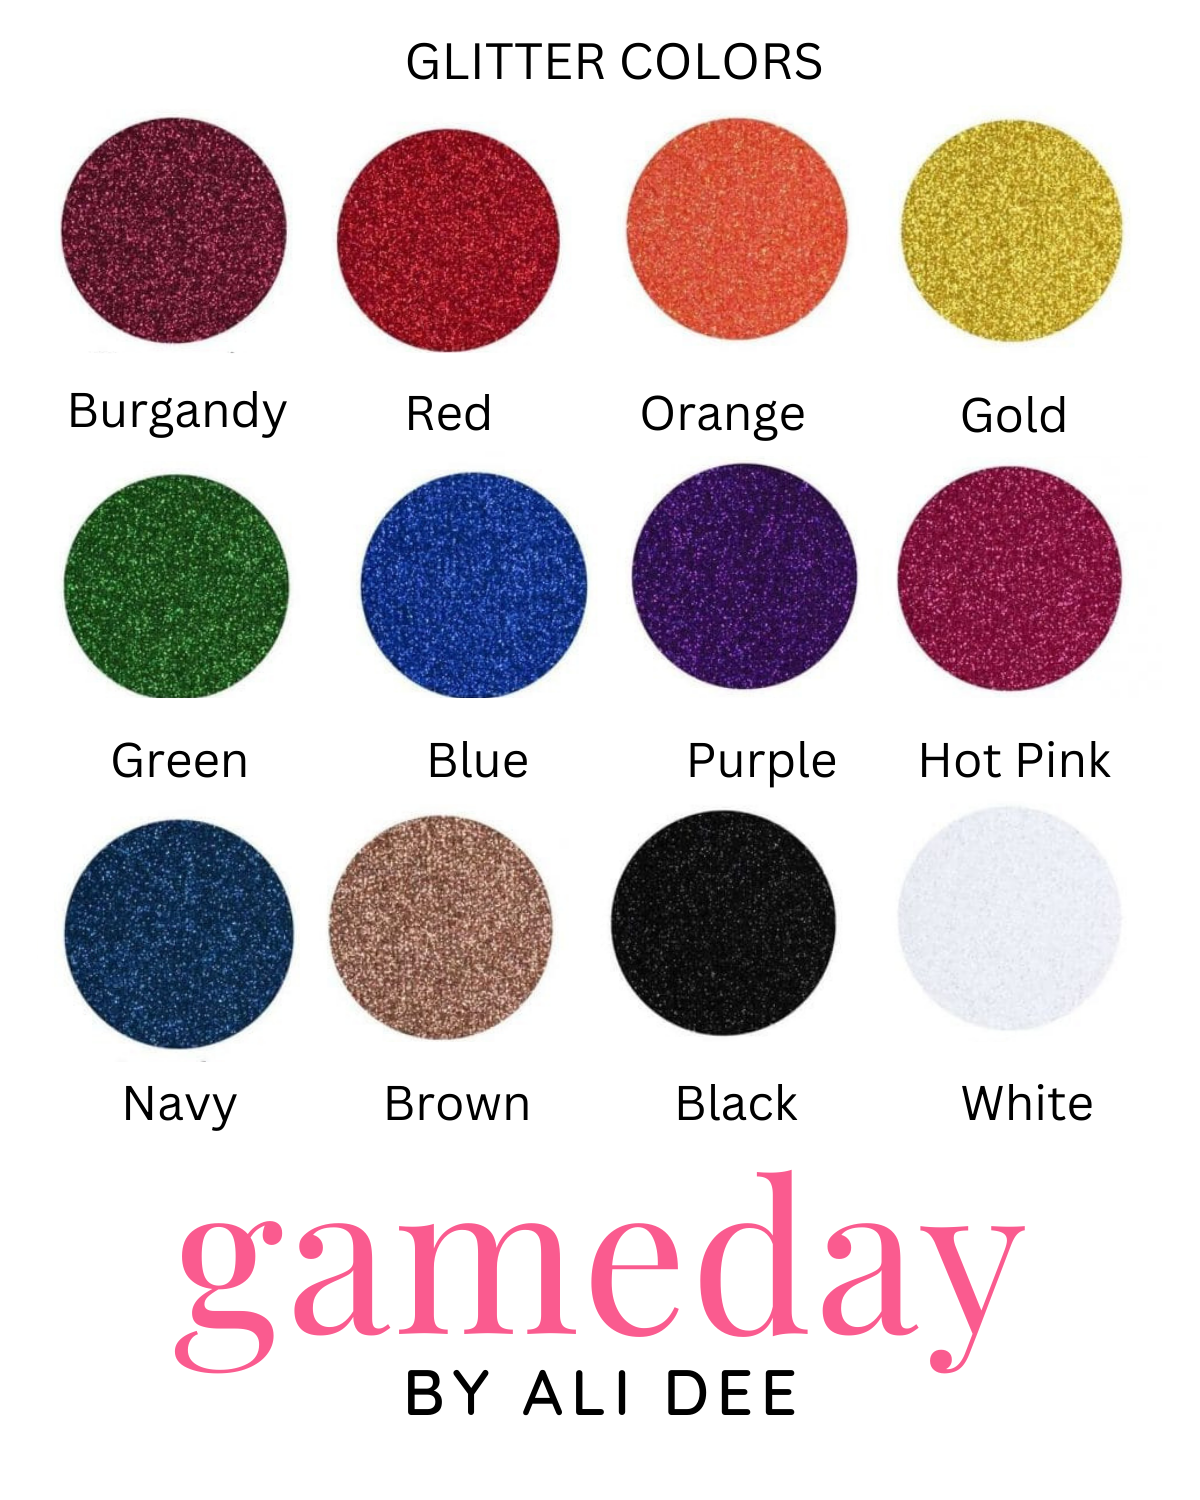 Customizable Gameday Vibes Trucker Gameday Hat - Pick Your Colors